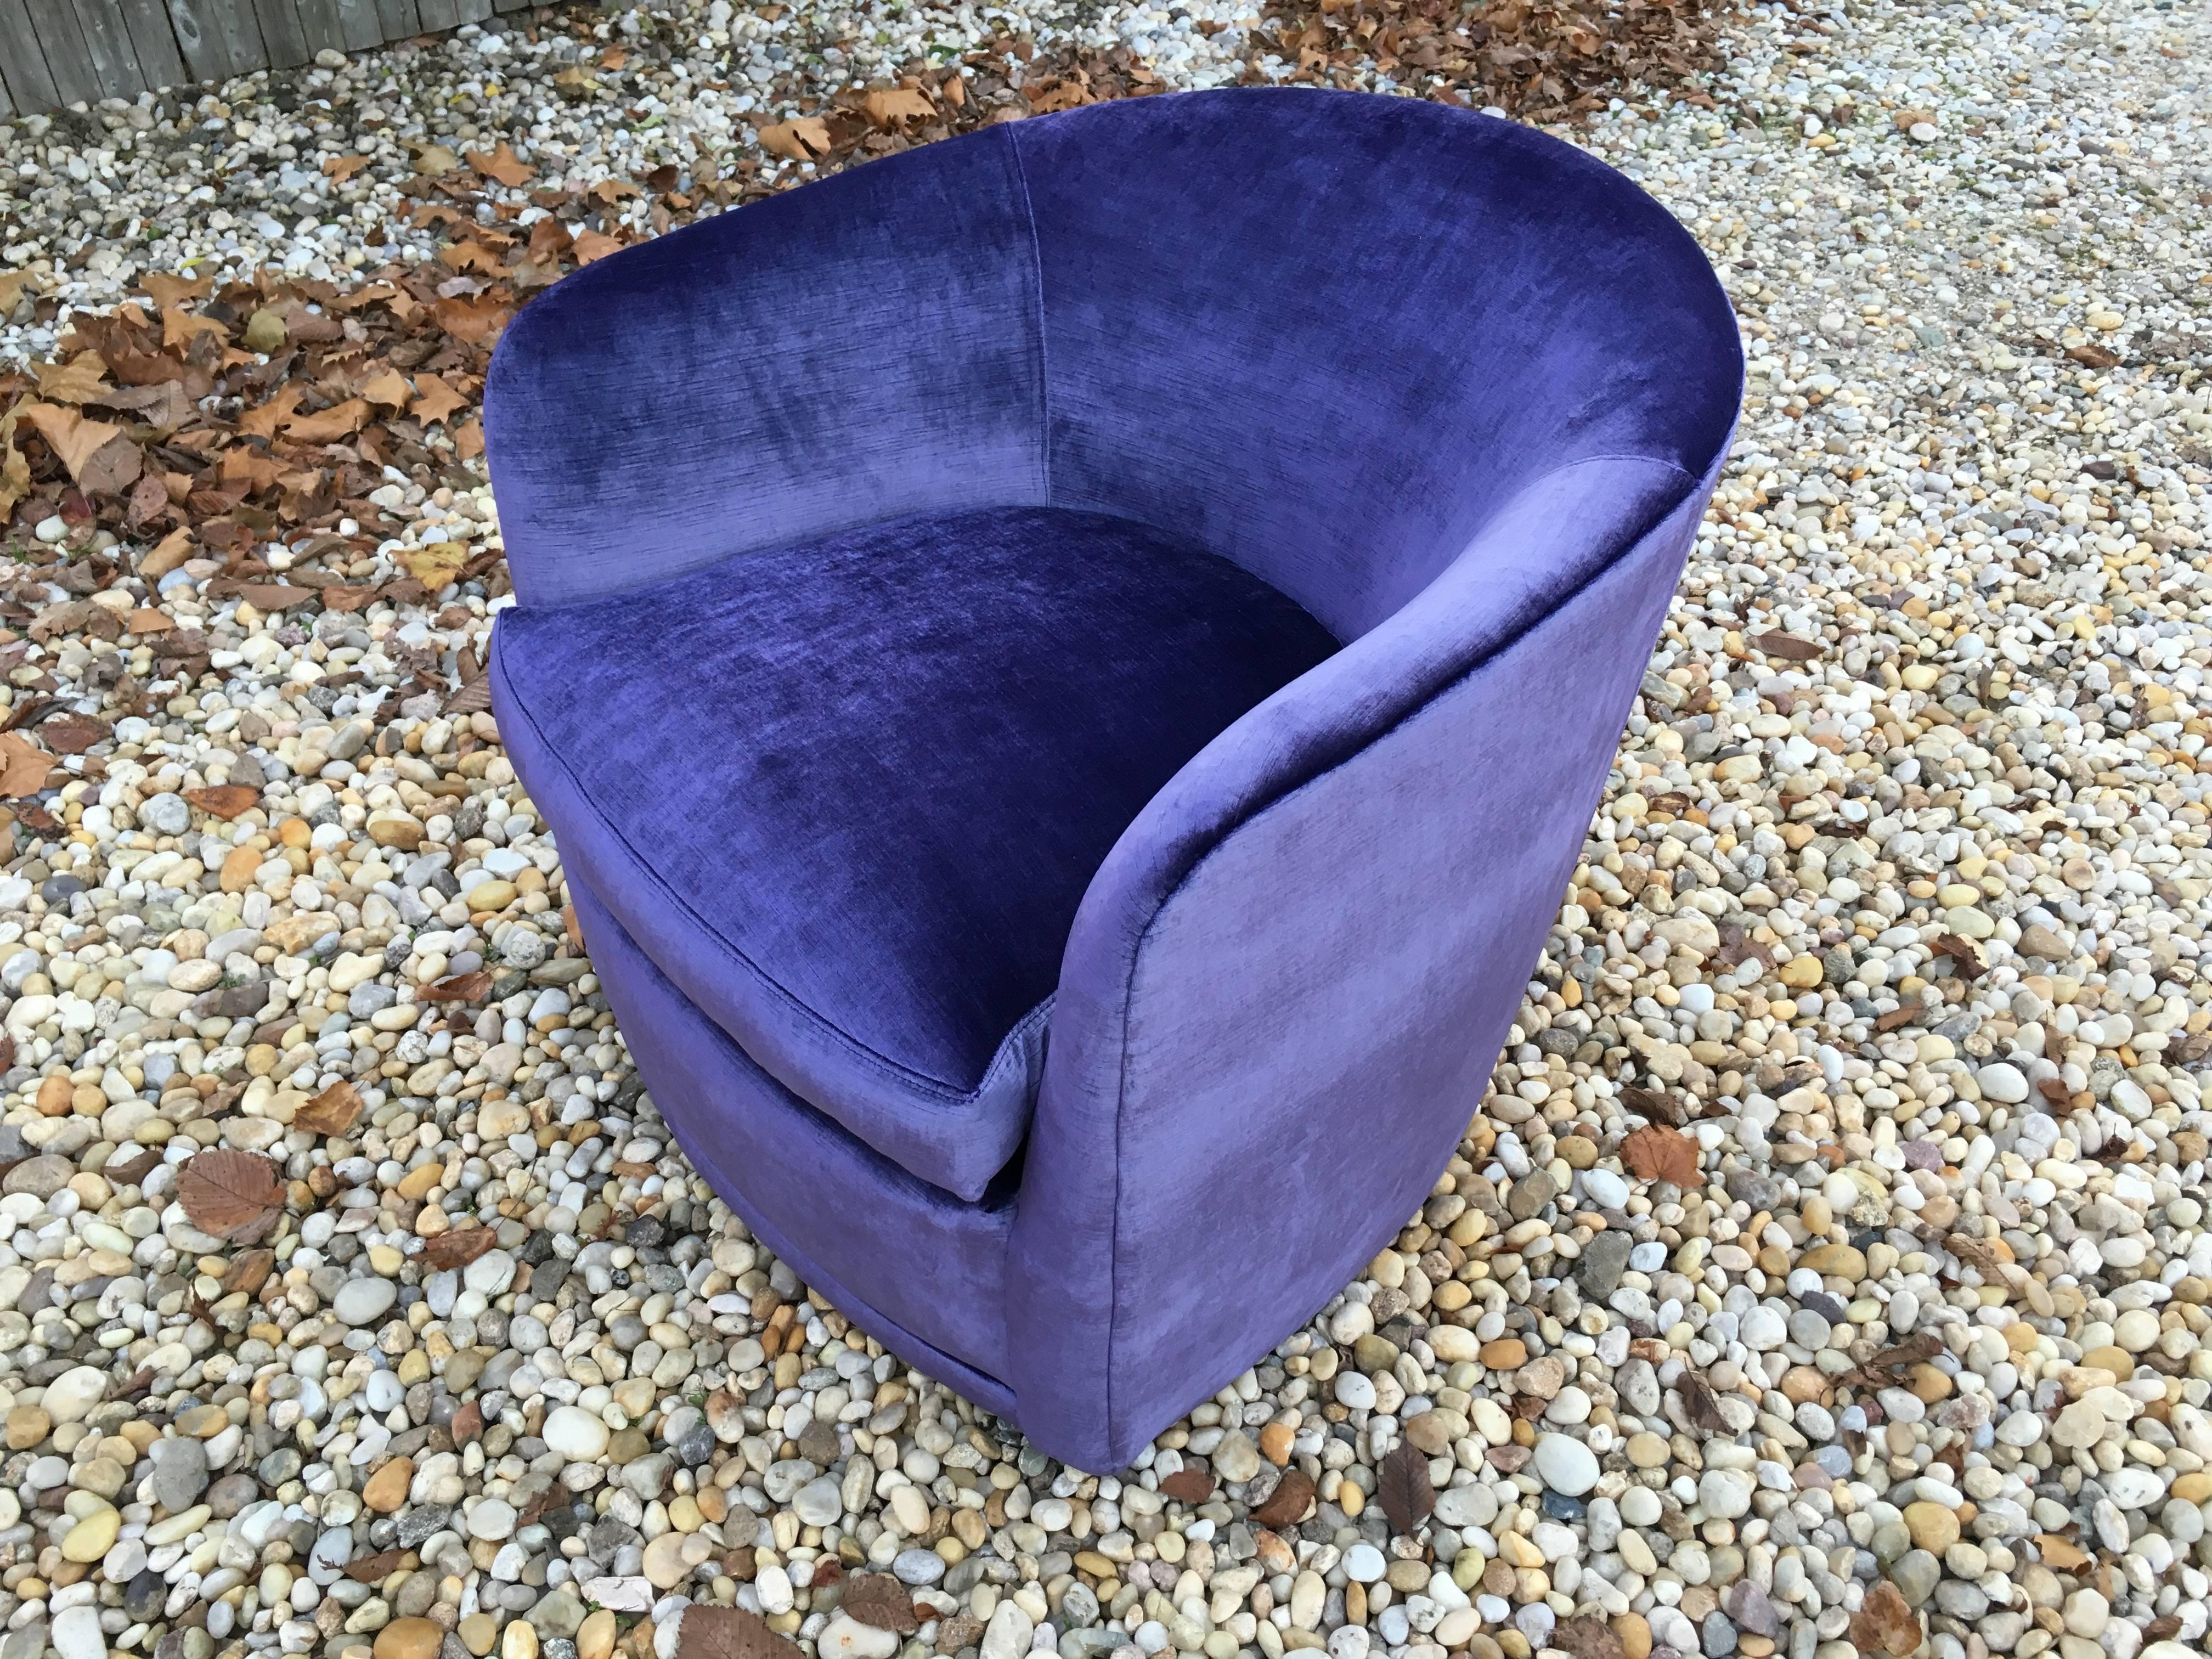 A lovely Baughman tub chair recovered in violet/periwinkle velvet.